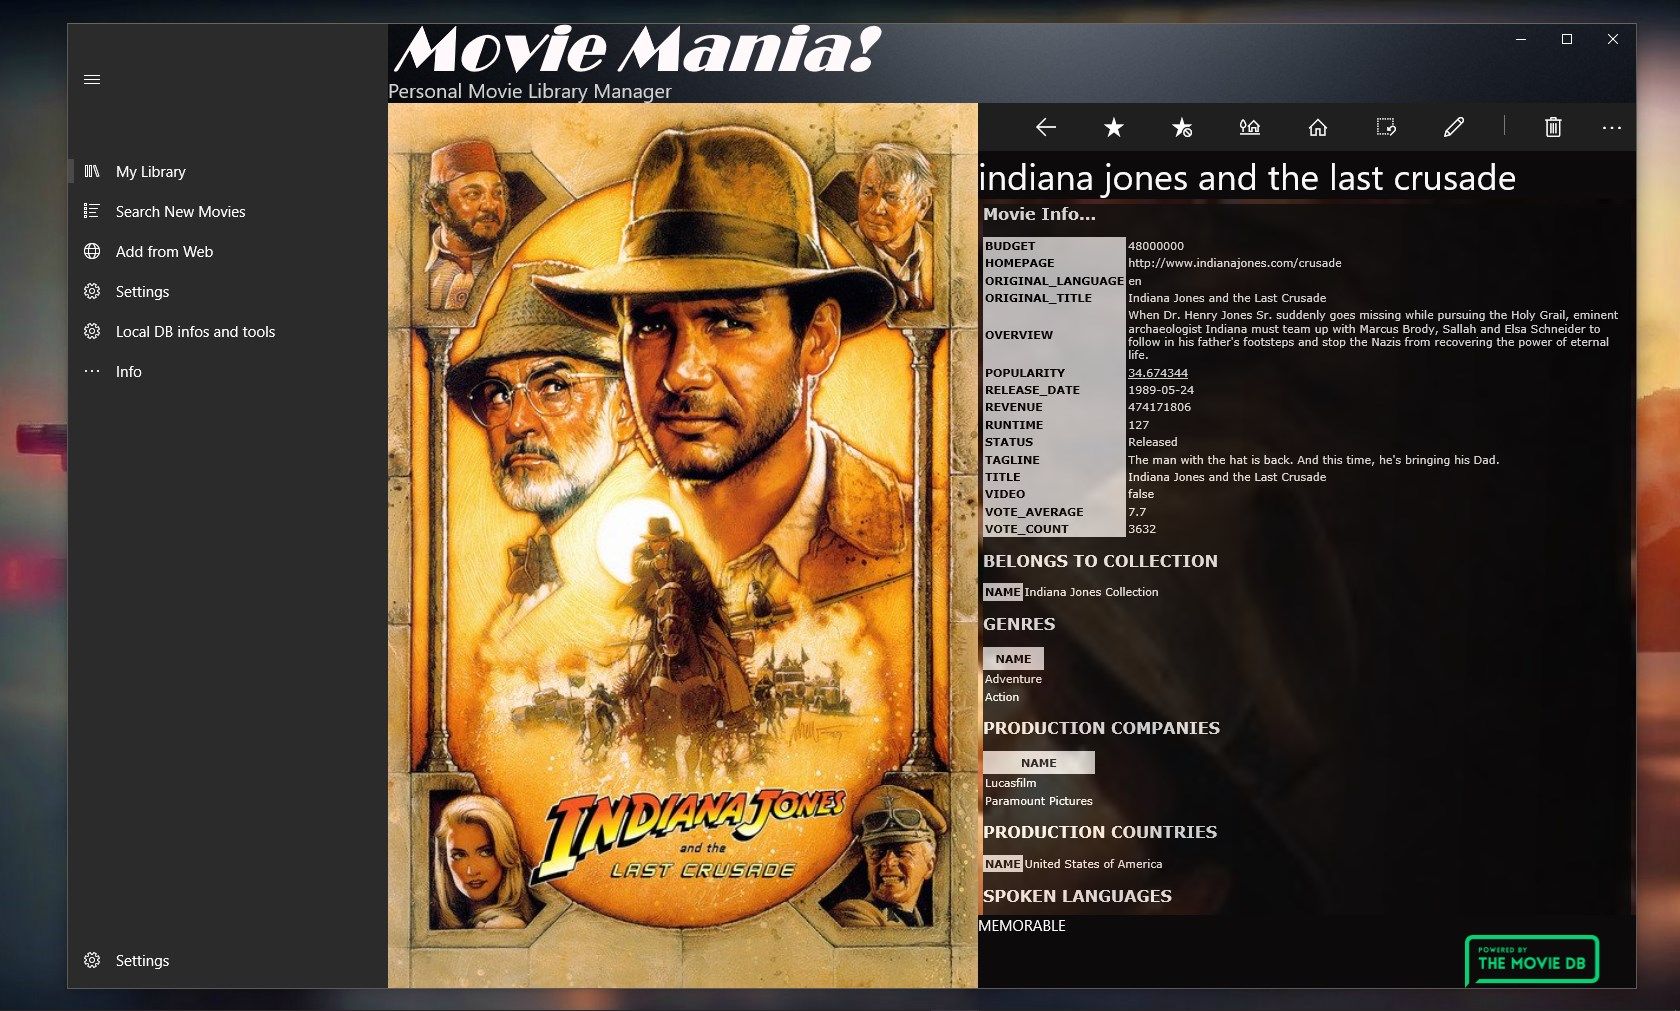 Discover extended movie informations about your movies...